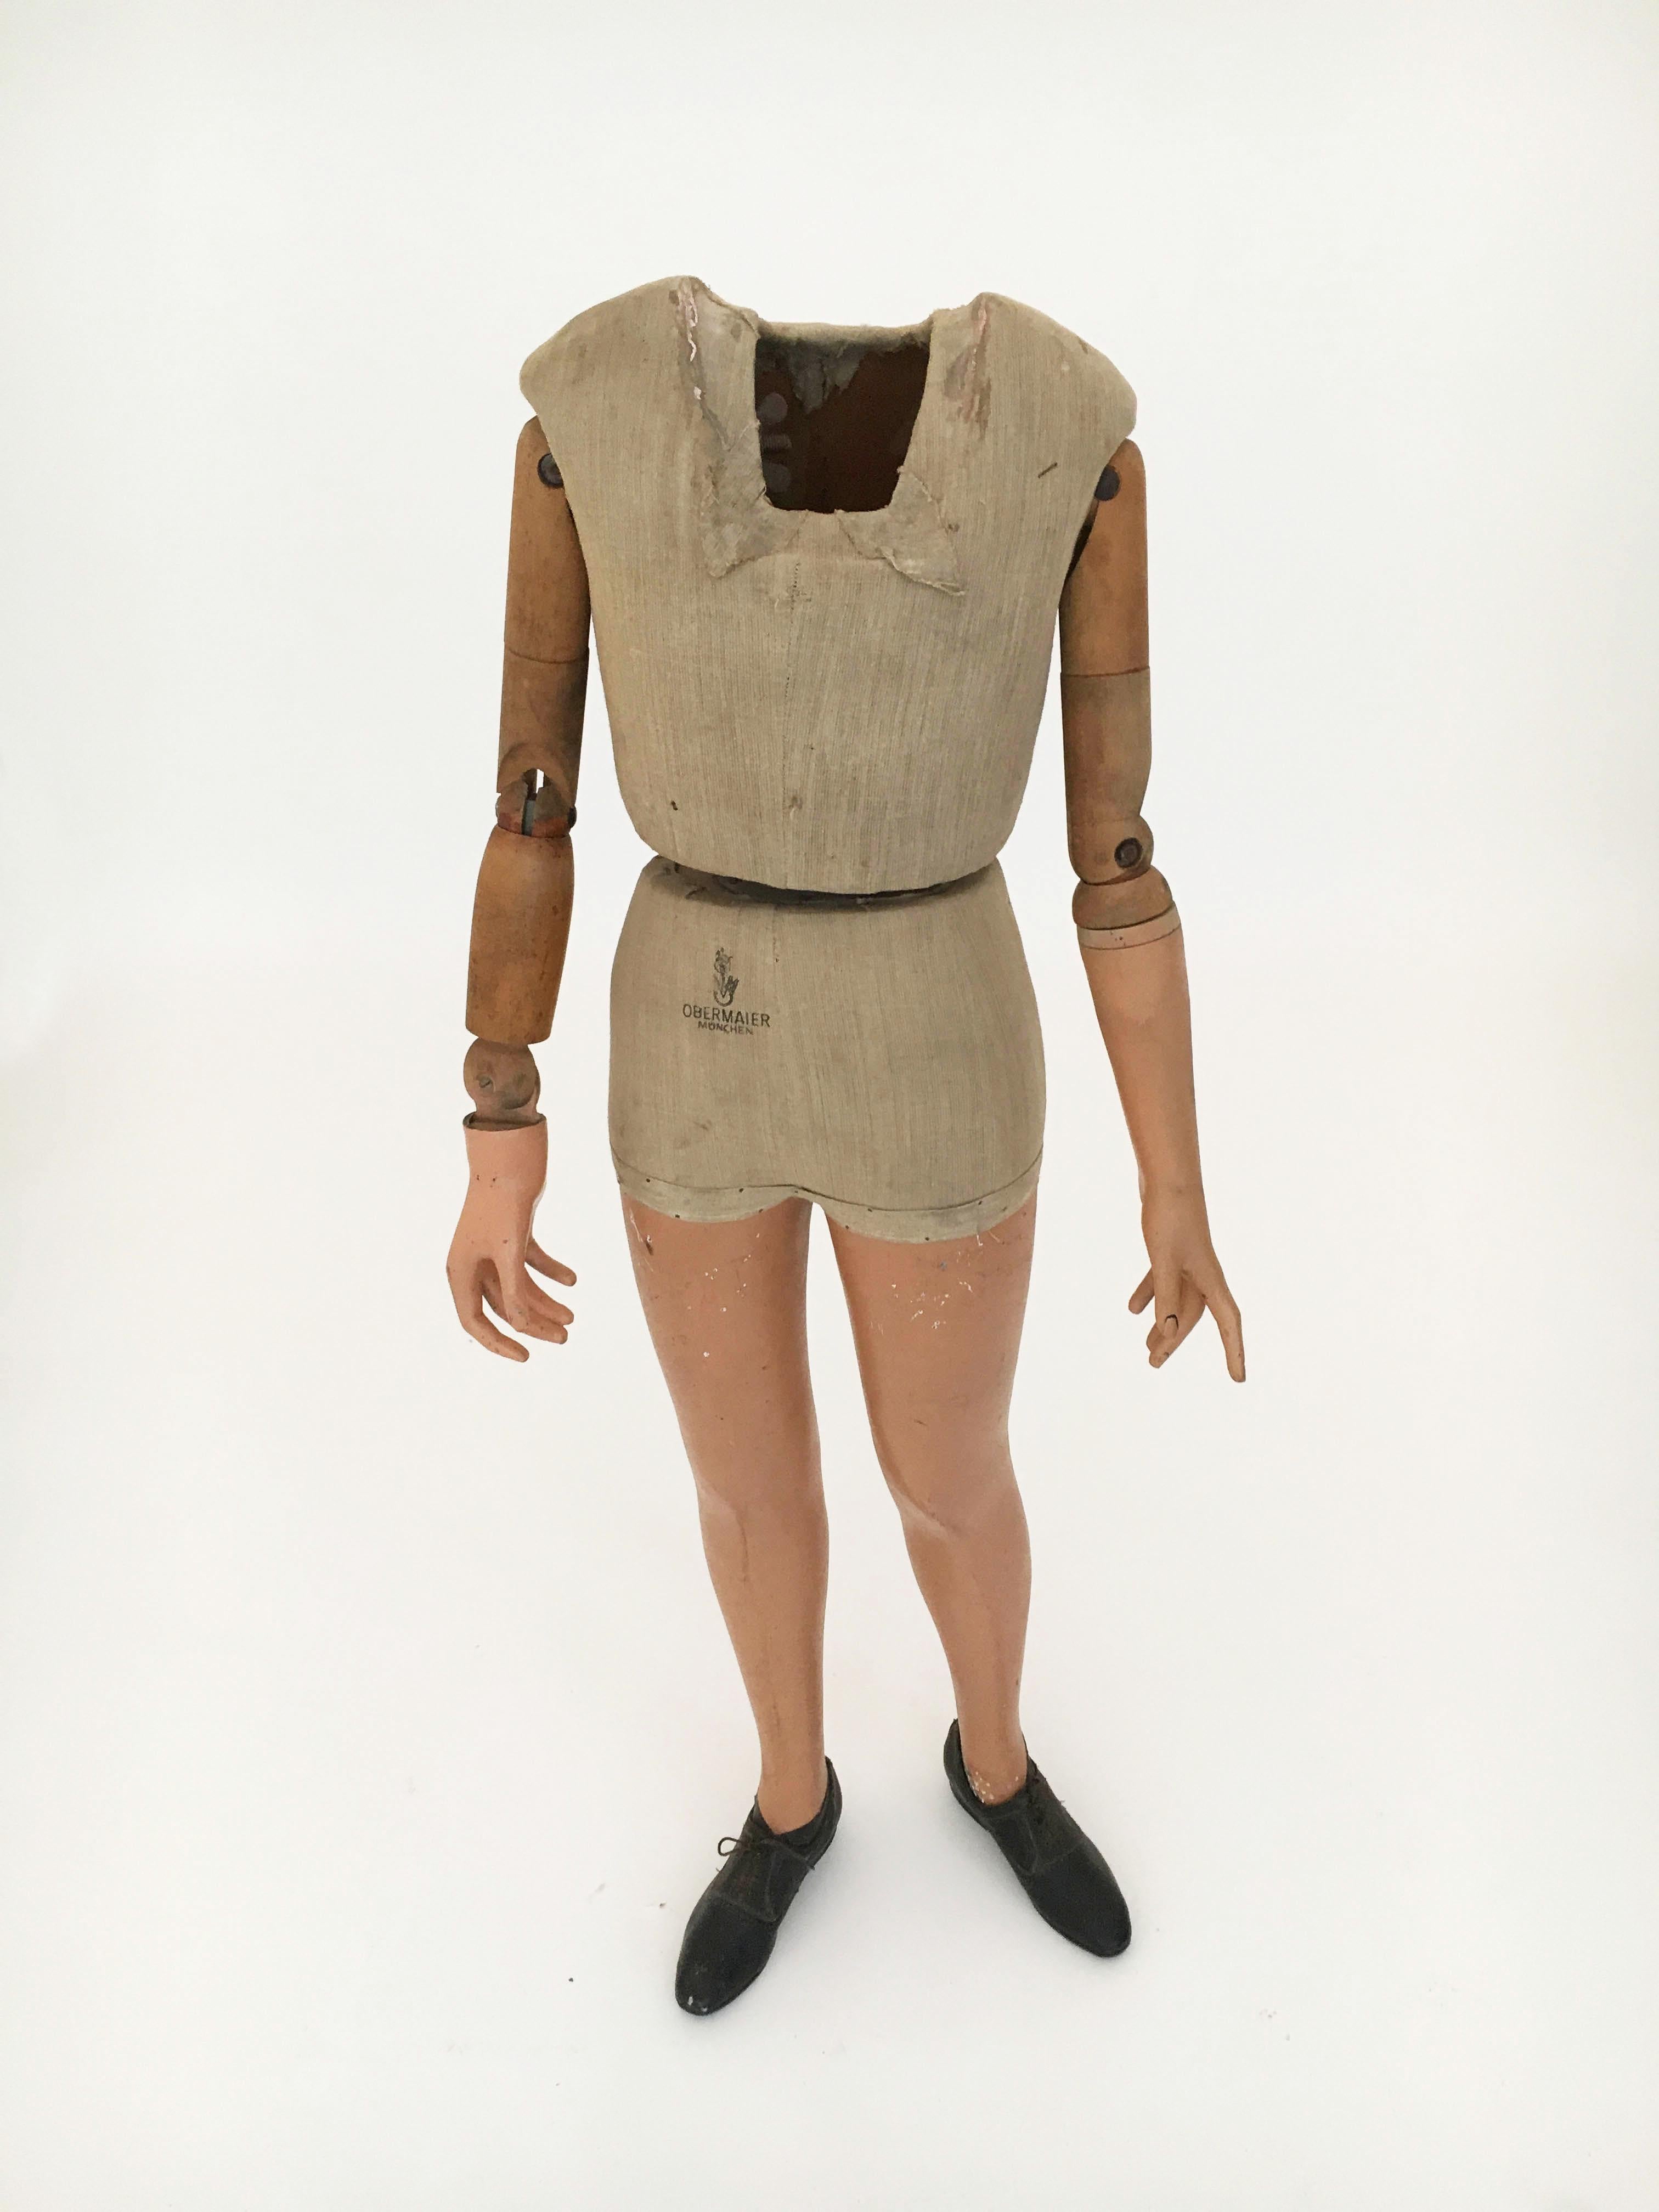 A fine tall boys torso German store mannequin, circa 1930s with moveable arms. The muslin covered body was used to display clothing in a shopfront window. Today we very much envision this as a modern piece of abstract DADA art piece. Or simply a